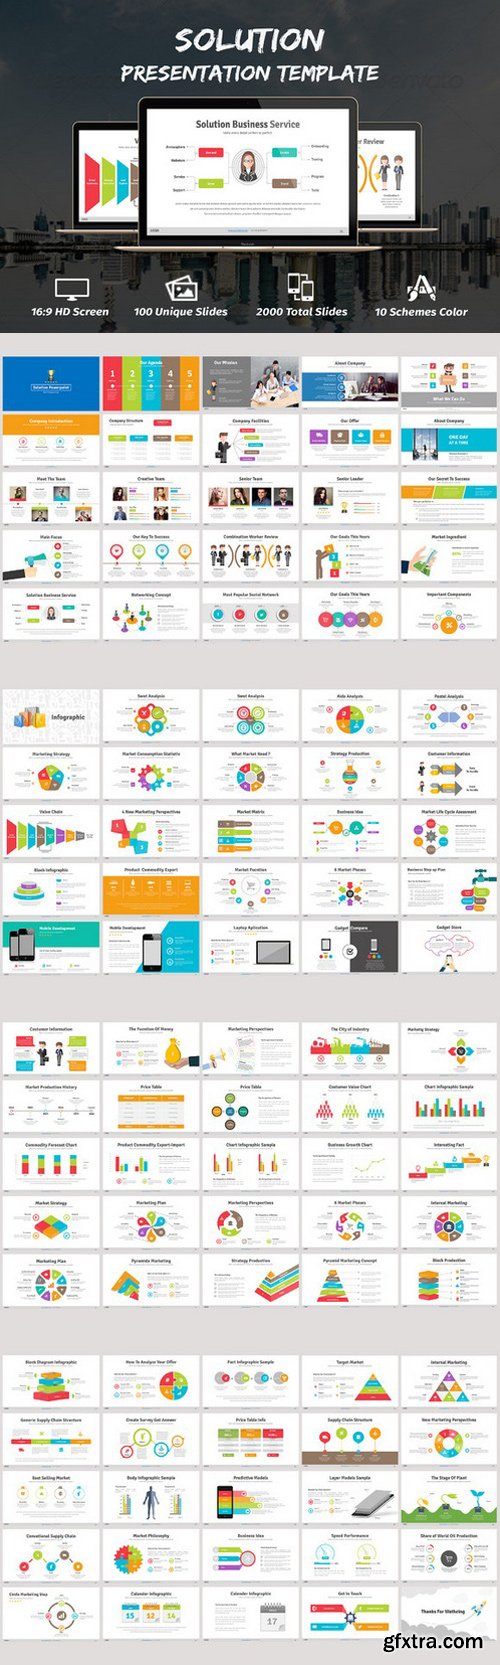 CM - Solution Powerpoint Template 320955